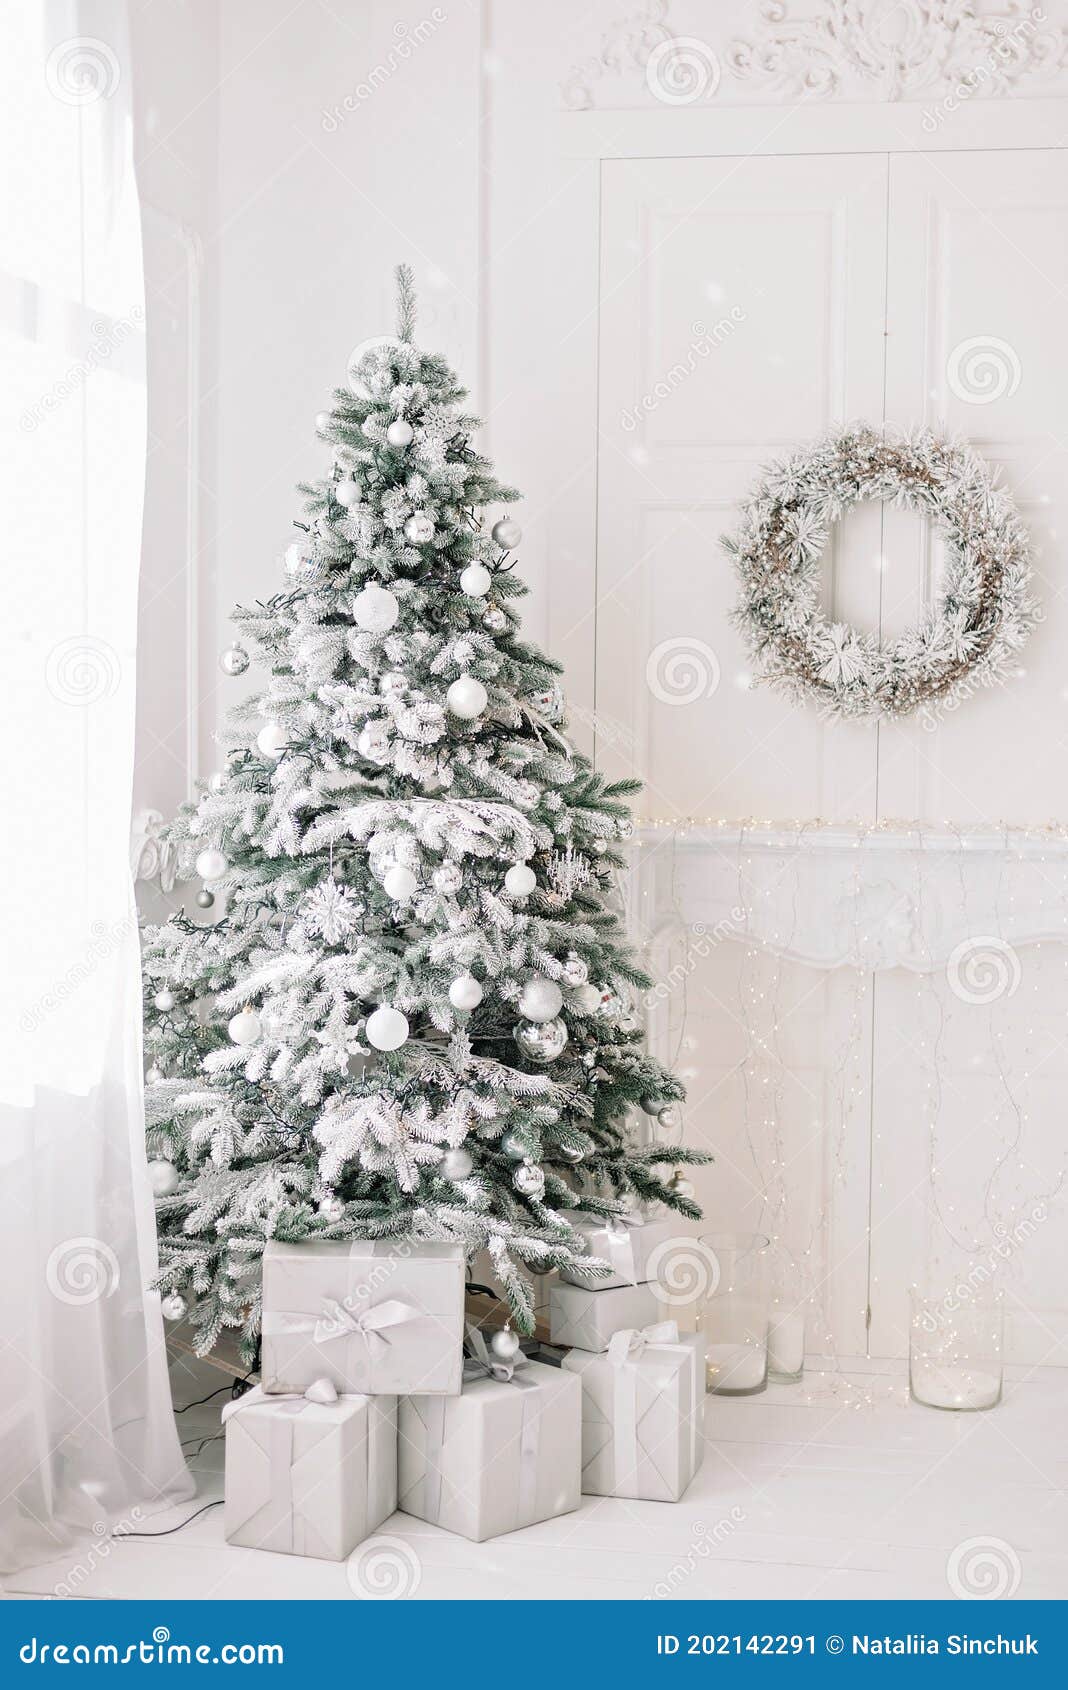 Christmas Tree At White House 2021